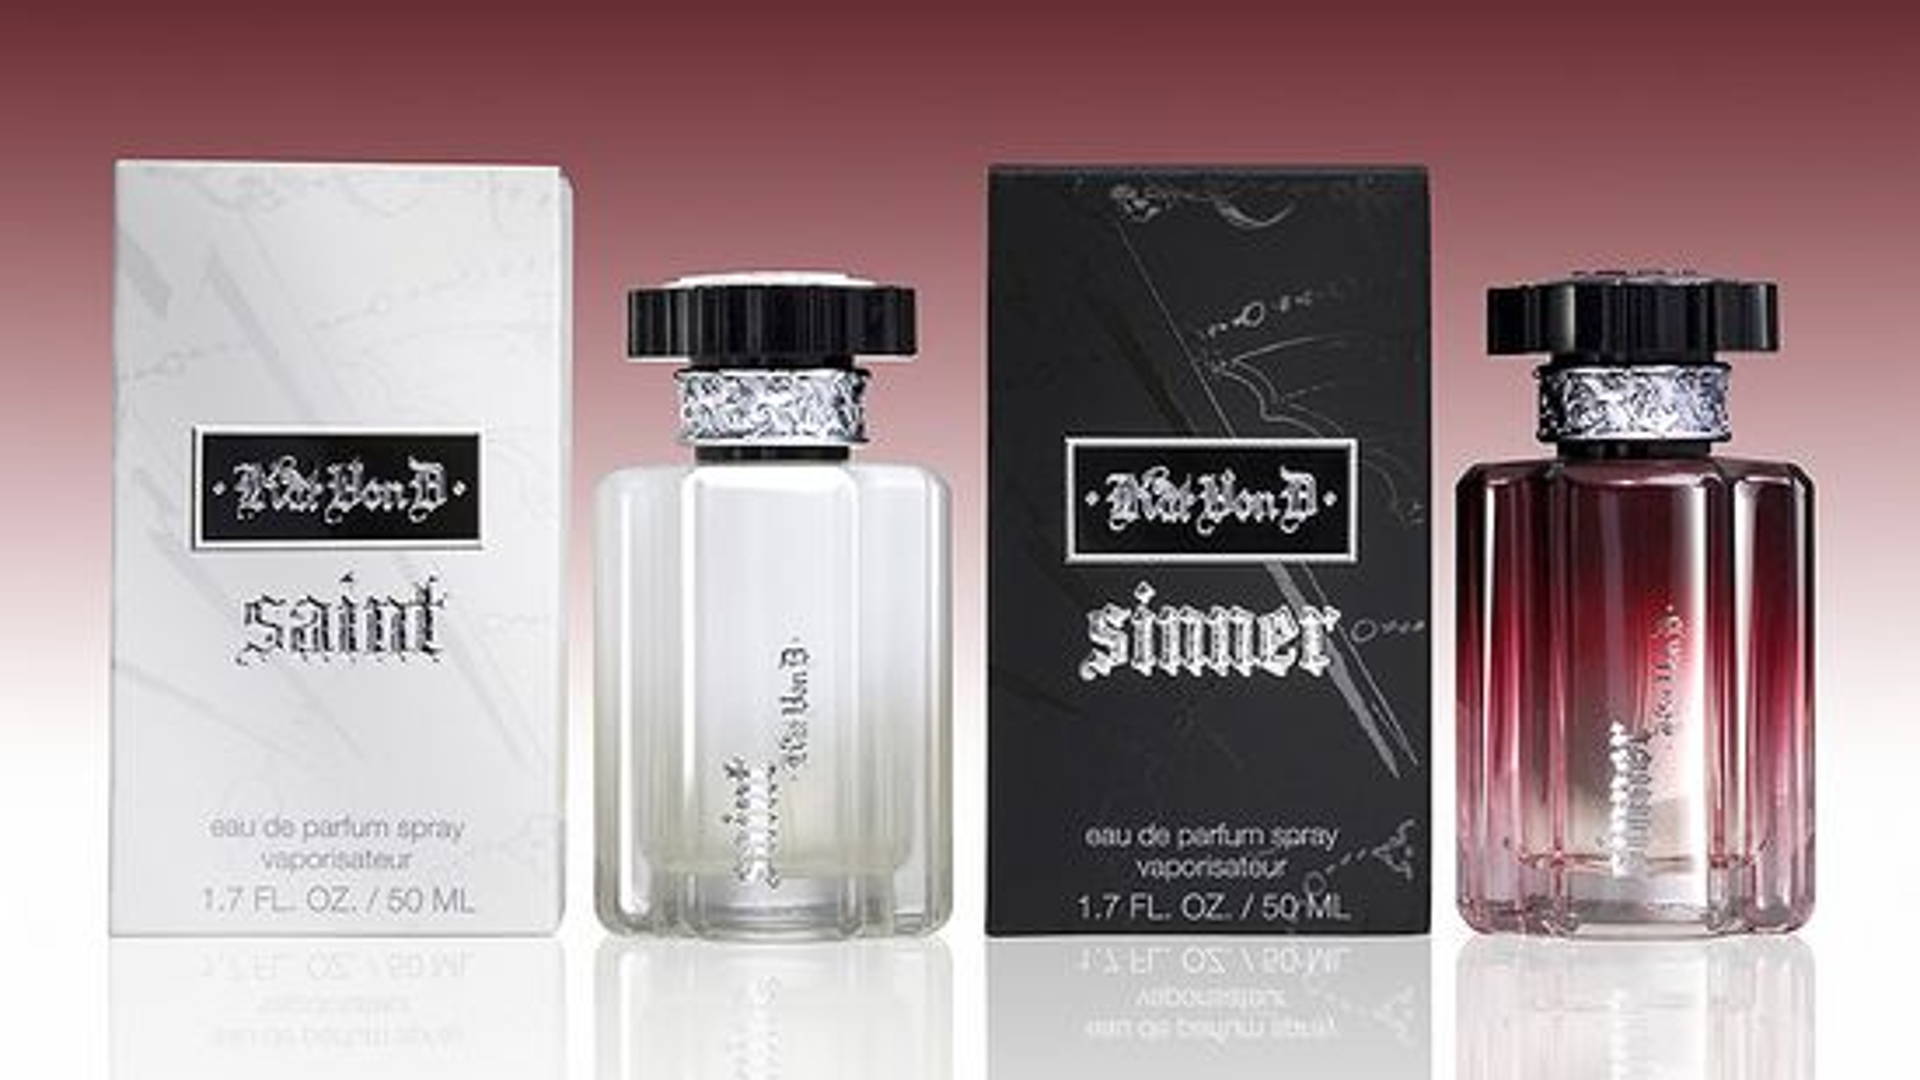 Featured image for Saint and Sinner, Kat Von D fragrance